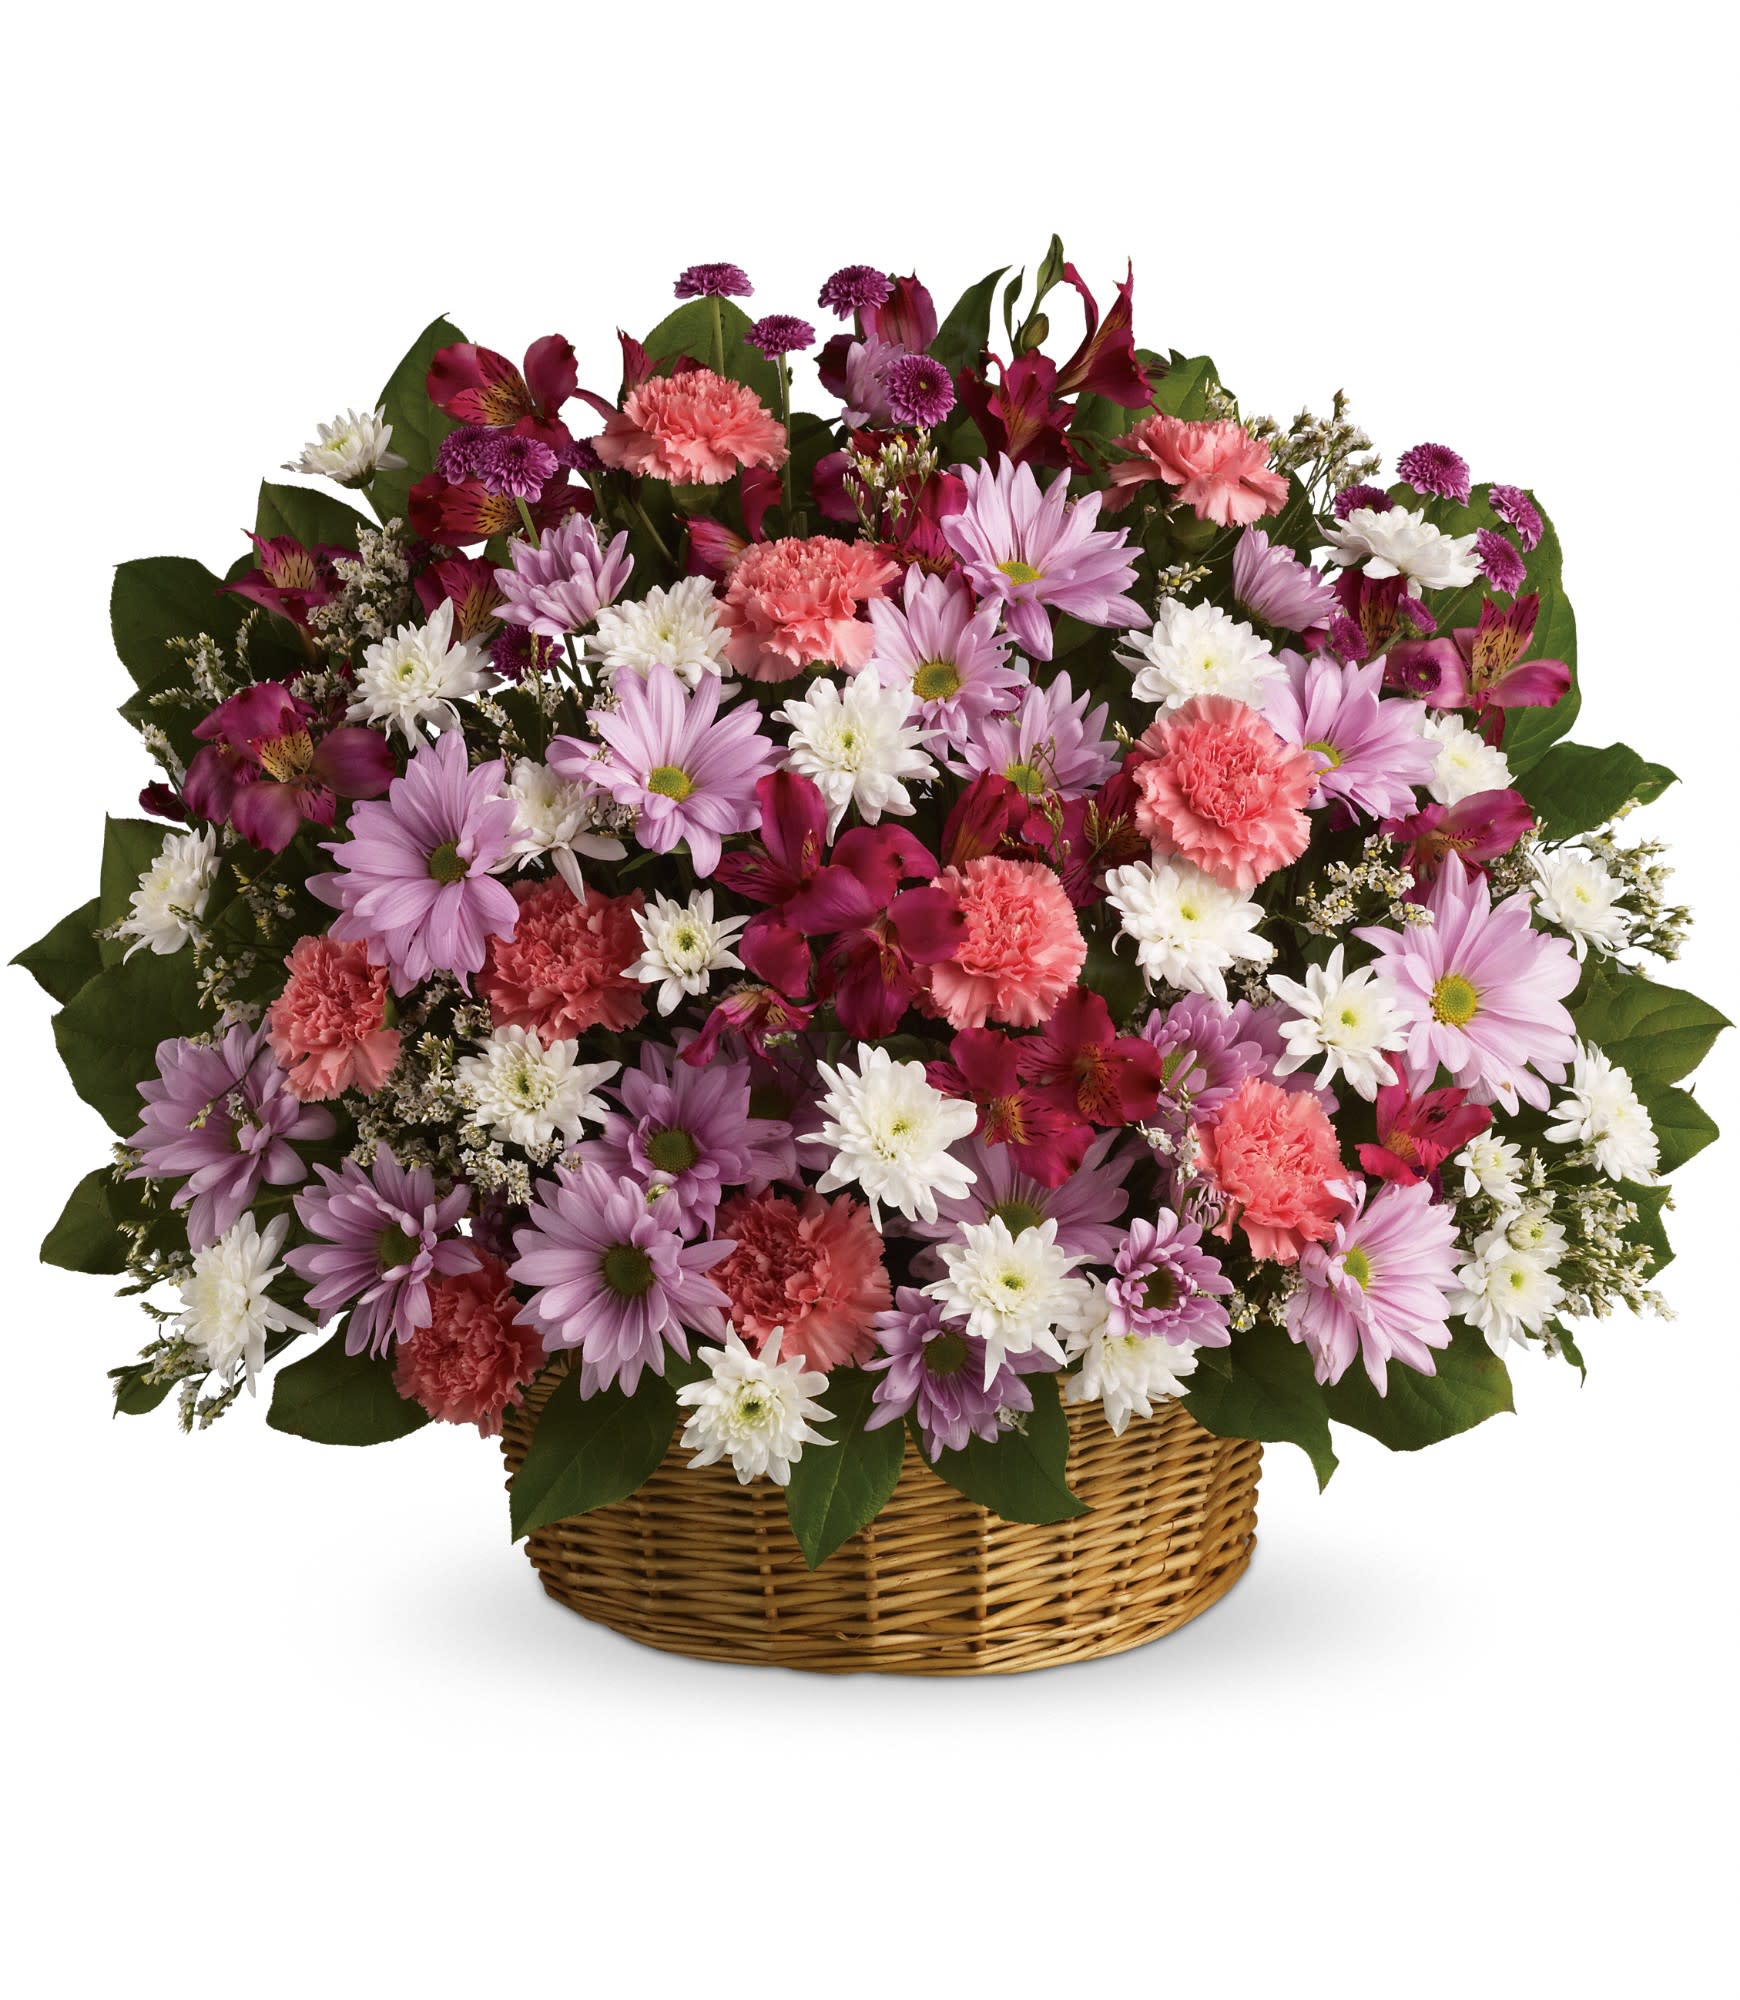 Rainbow Reflections Basket by Teleflora - Soft and soothing. This basket is overflowing with pastel flowers and your sincere message of hope to those in mourning. 